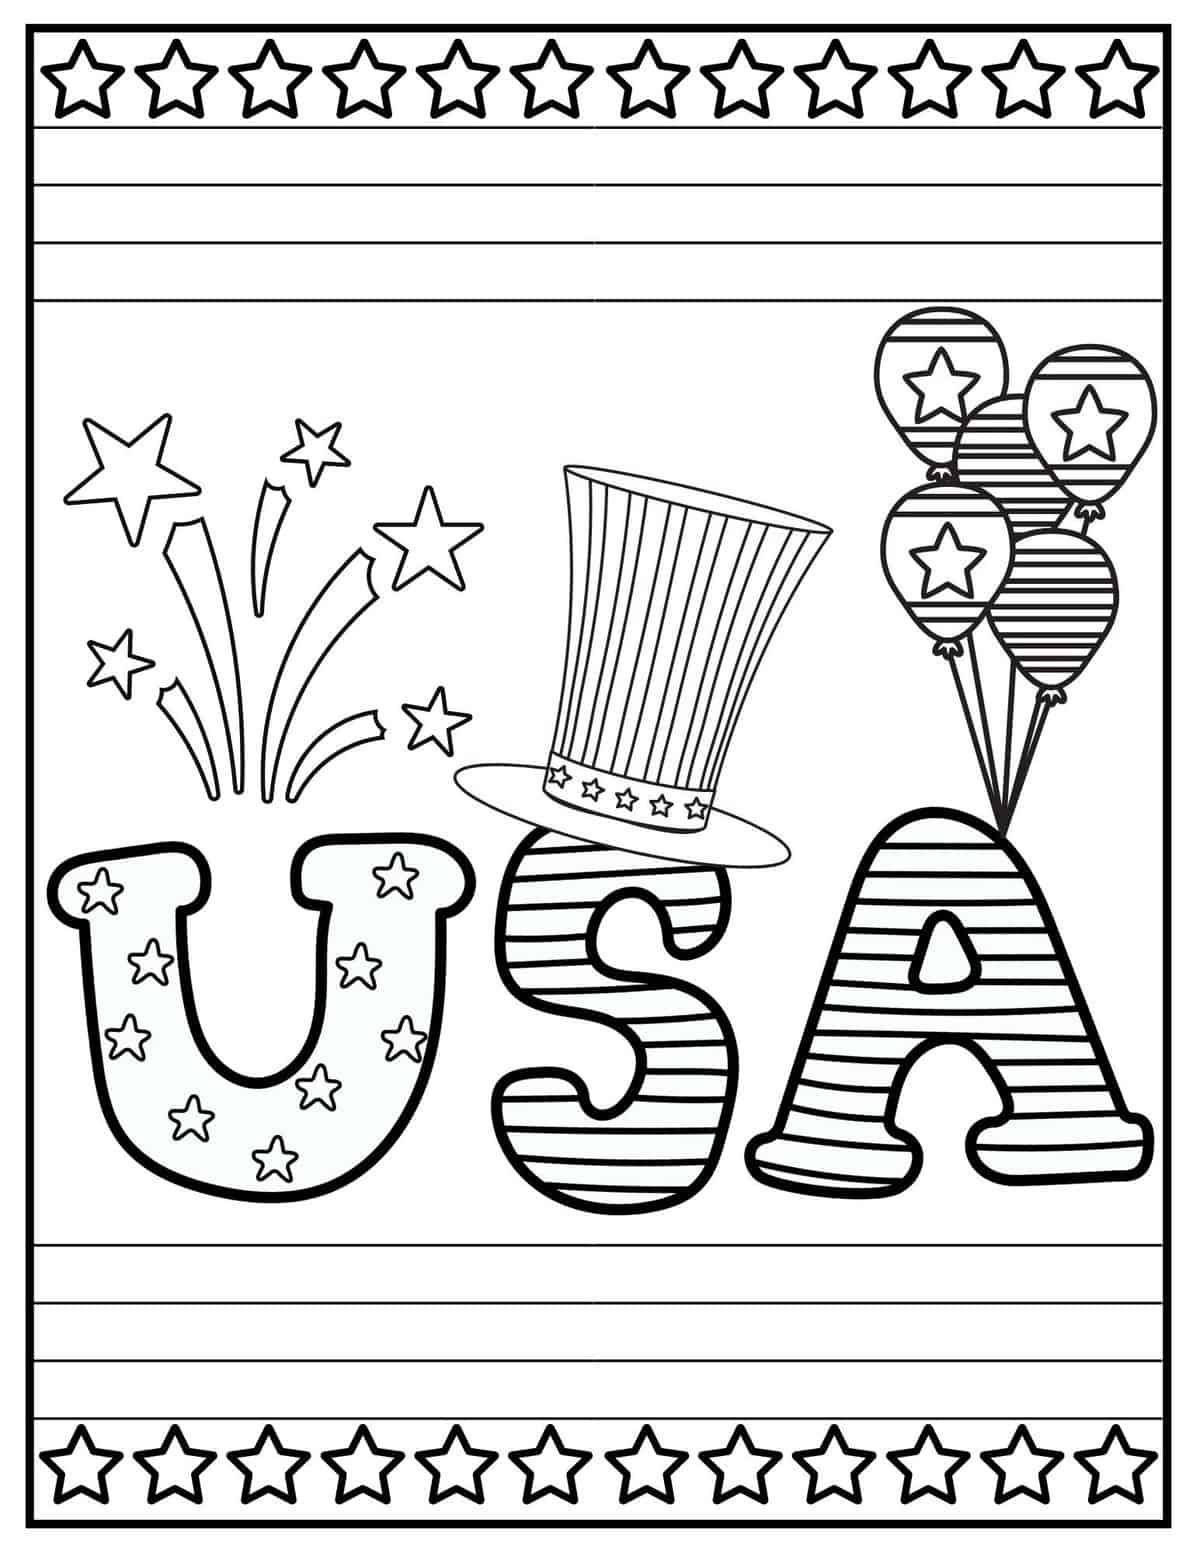 usa words with uncle sam hat, balloons and fireworks